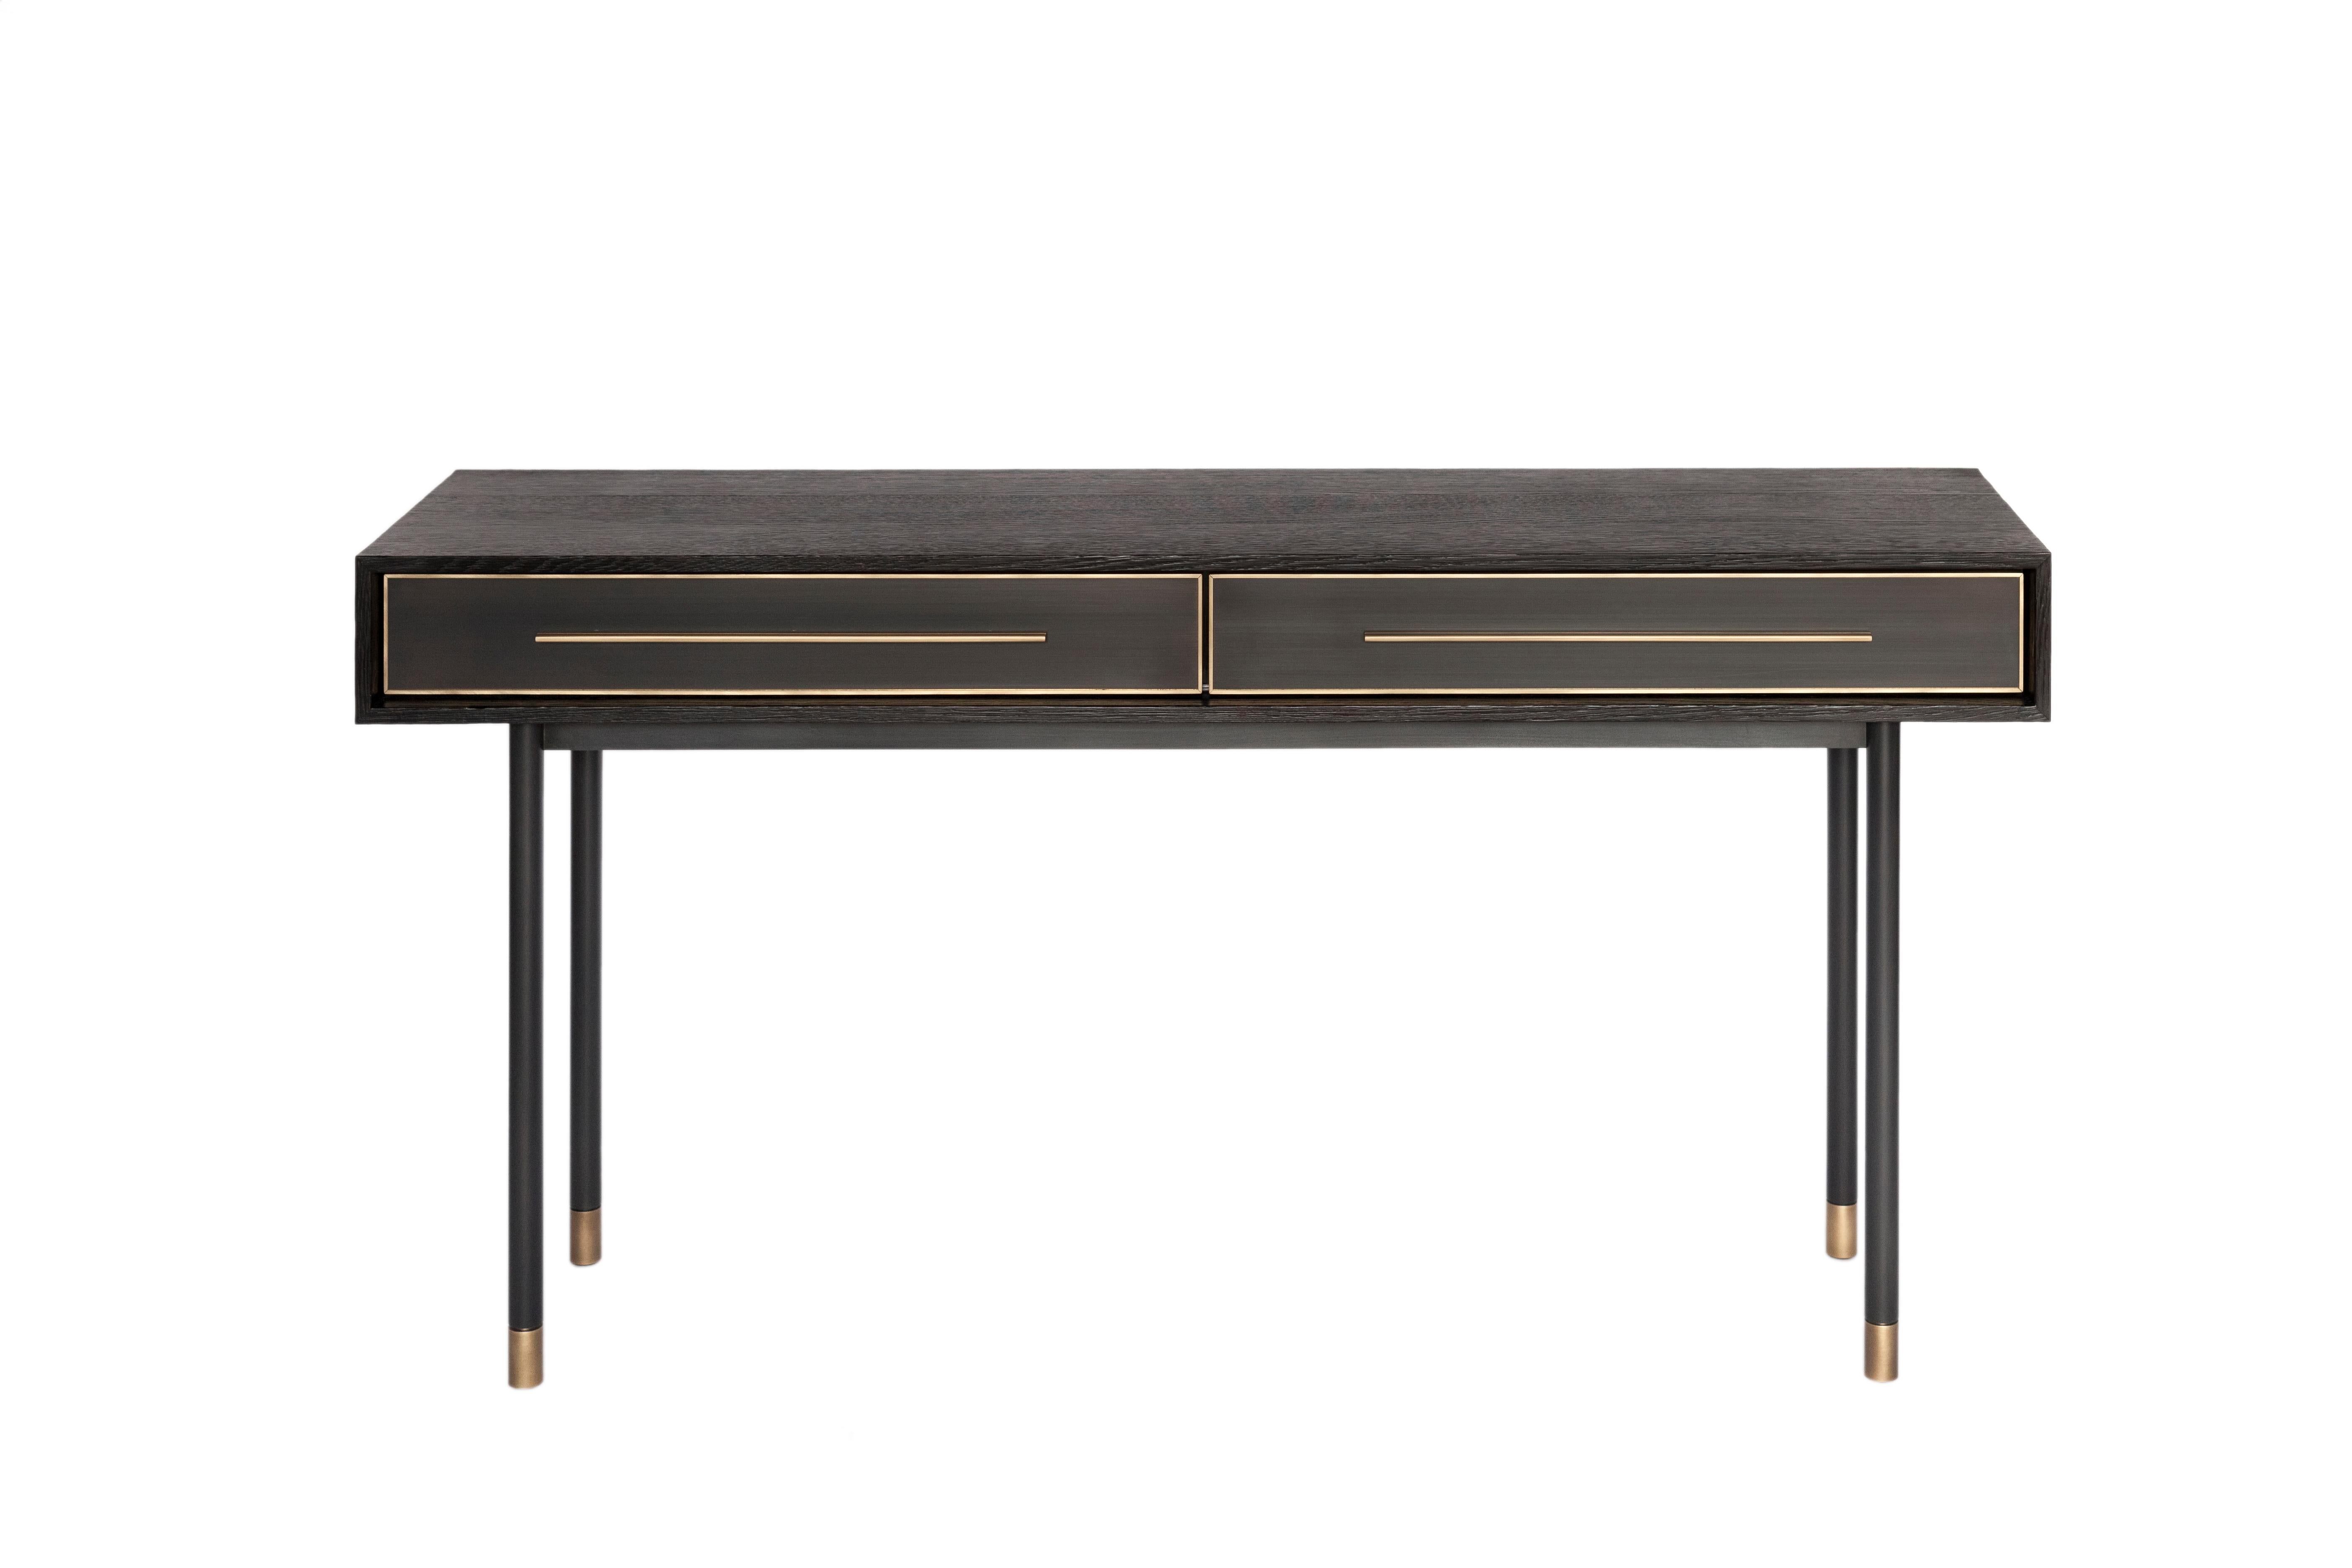 The sleek and striking Jasper console features charred black oak, a blackened steel frame and bronze base with adjustable feet, and blackened bronze encased in epoxy resin drawers with black leather lining and hand-sculpted bronze pulls.

Dimensions